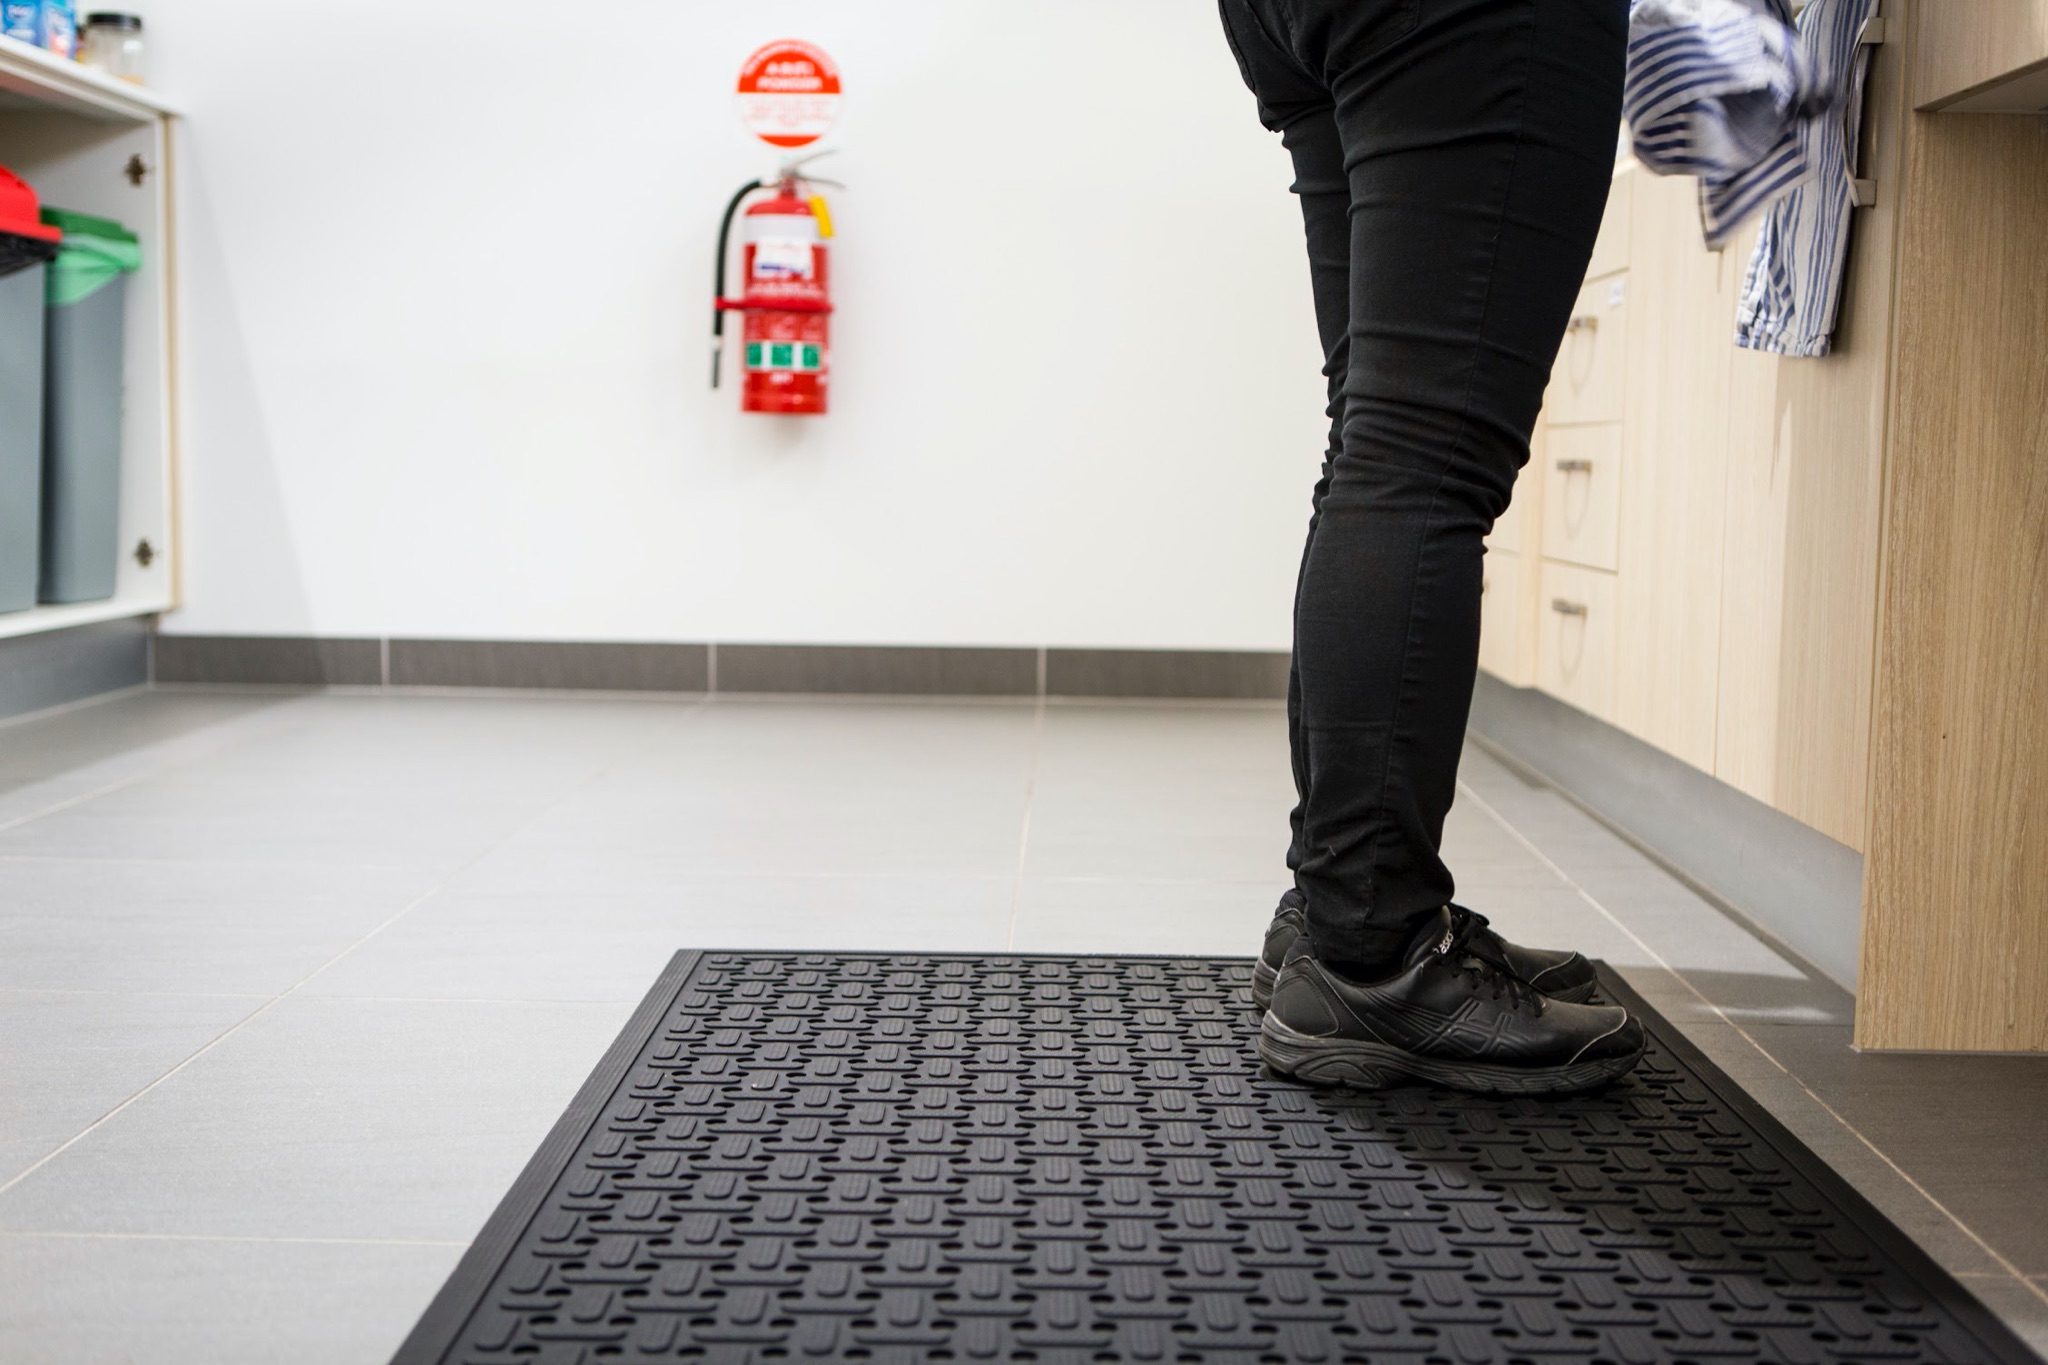 The Many Benefits of Nitrile Rubber Backing on Floor Mats